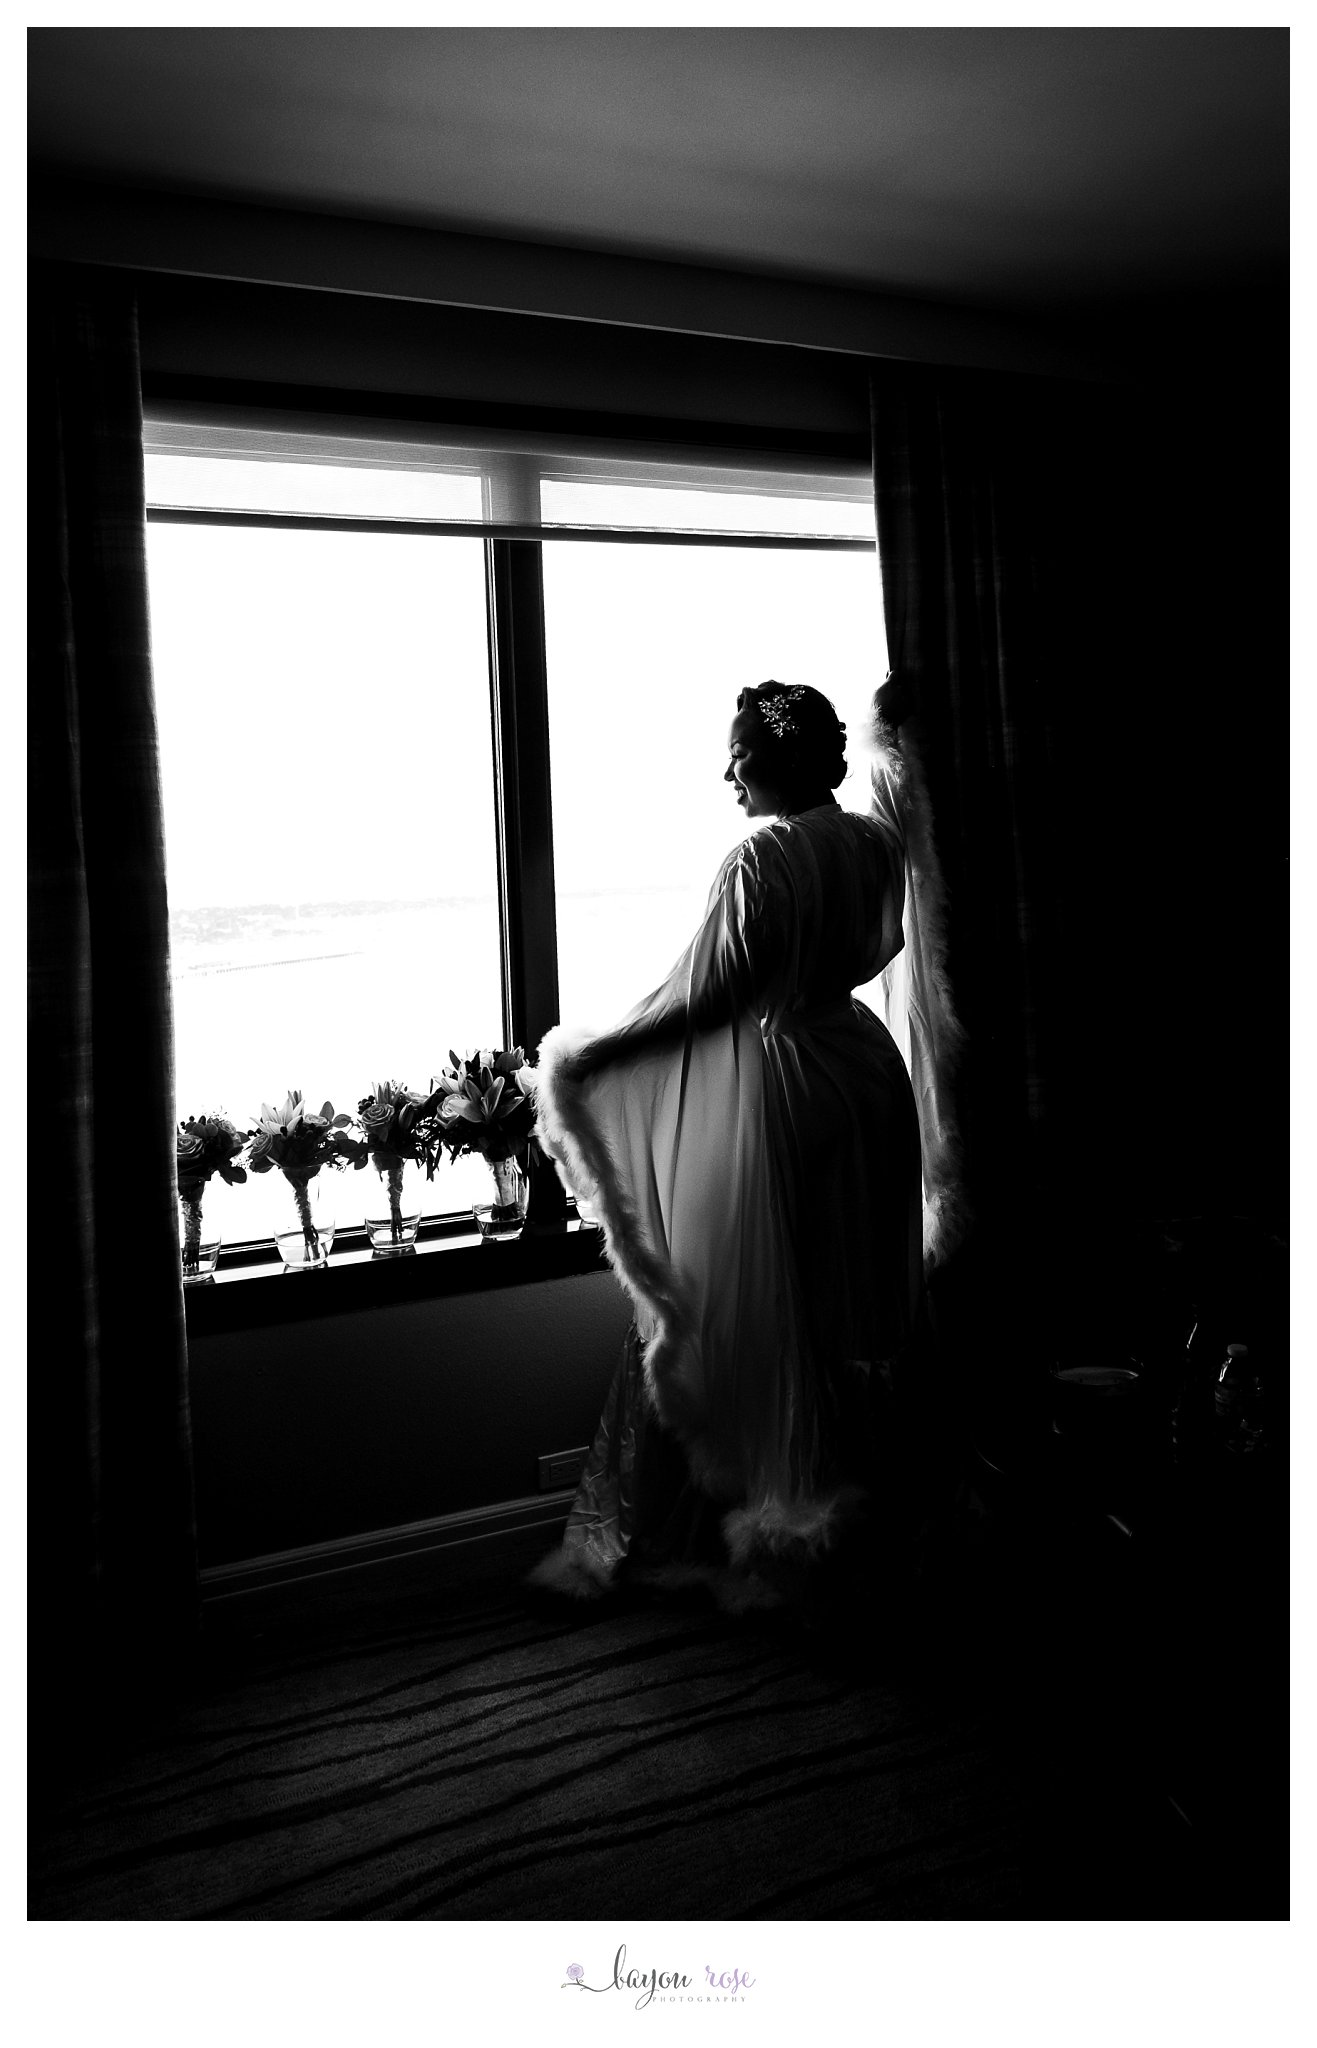 black and white photo of bride in window